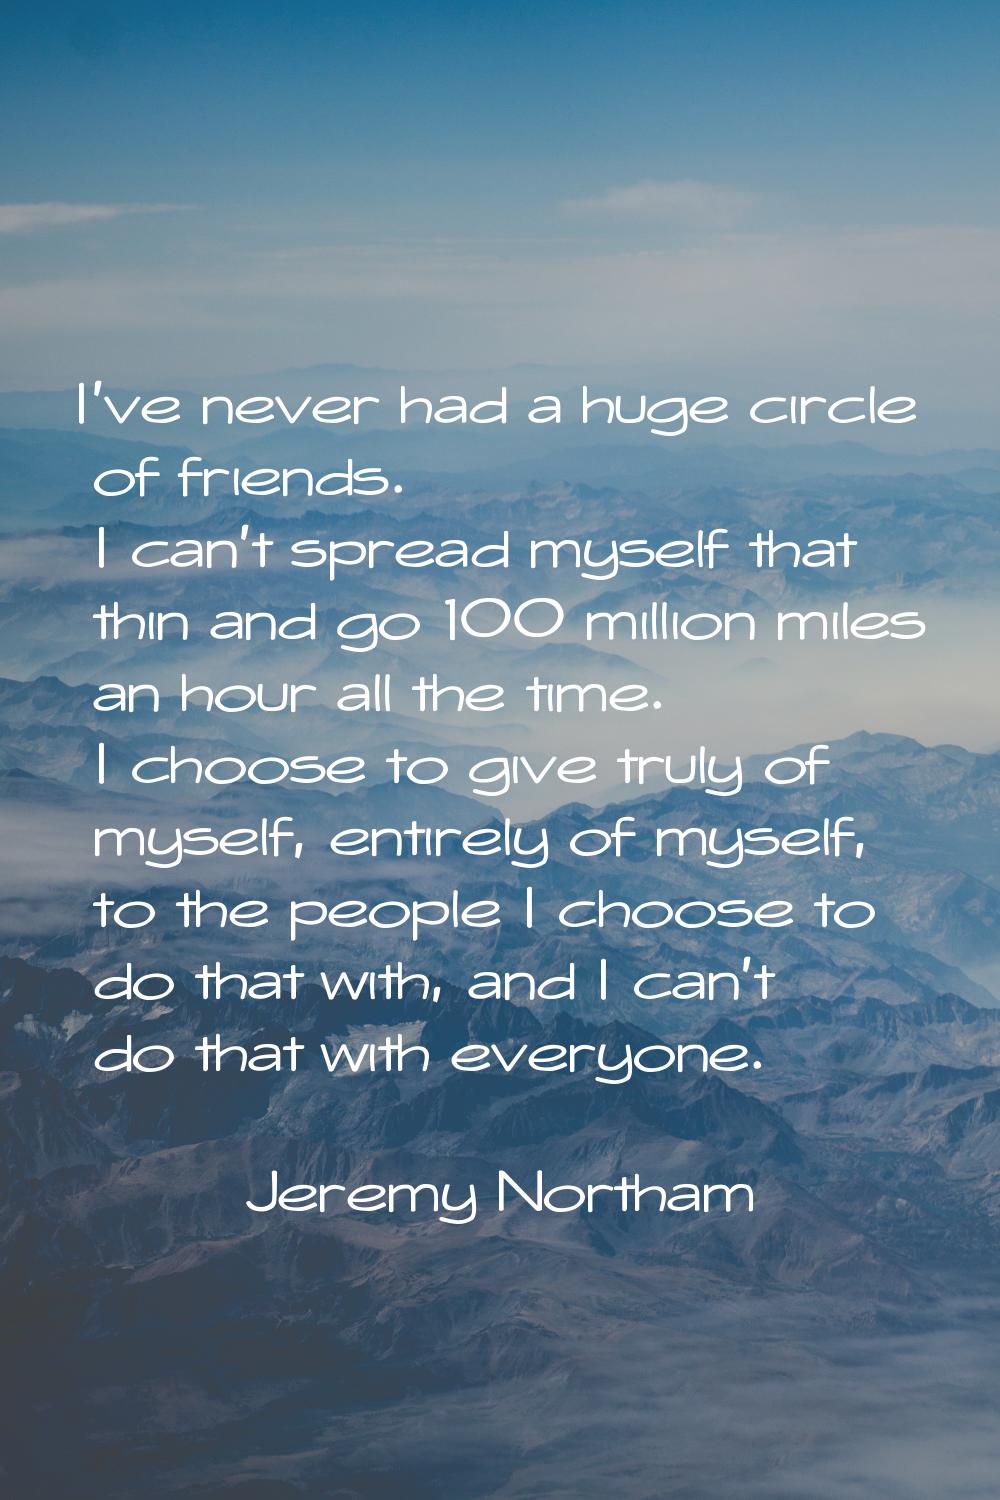 I've never had a huge circle of friends. I can't spread myself that thin and go 100 million miles a